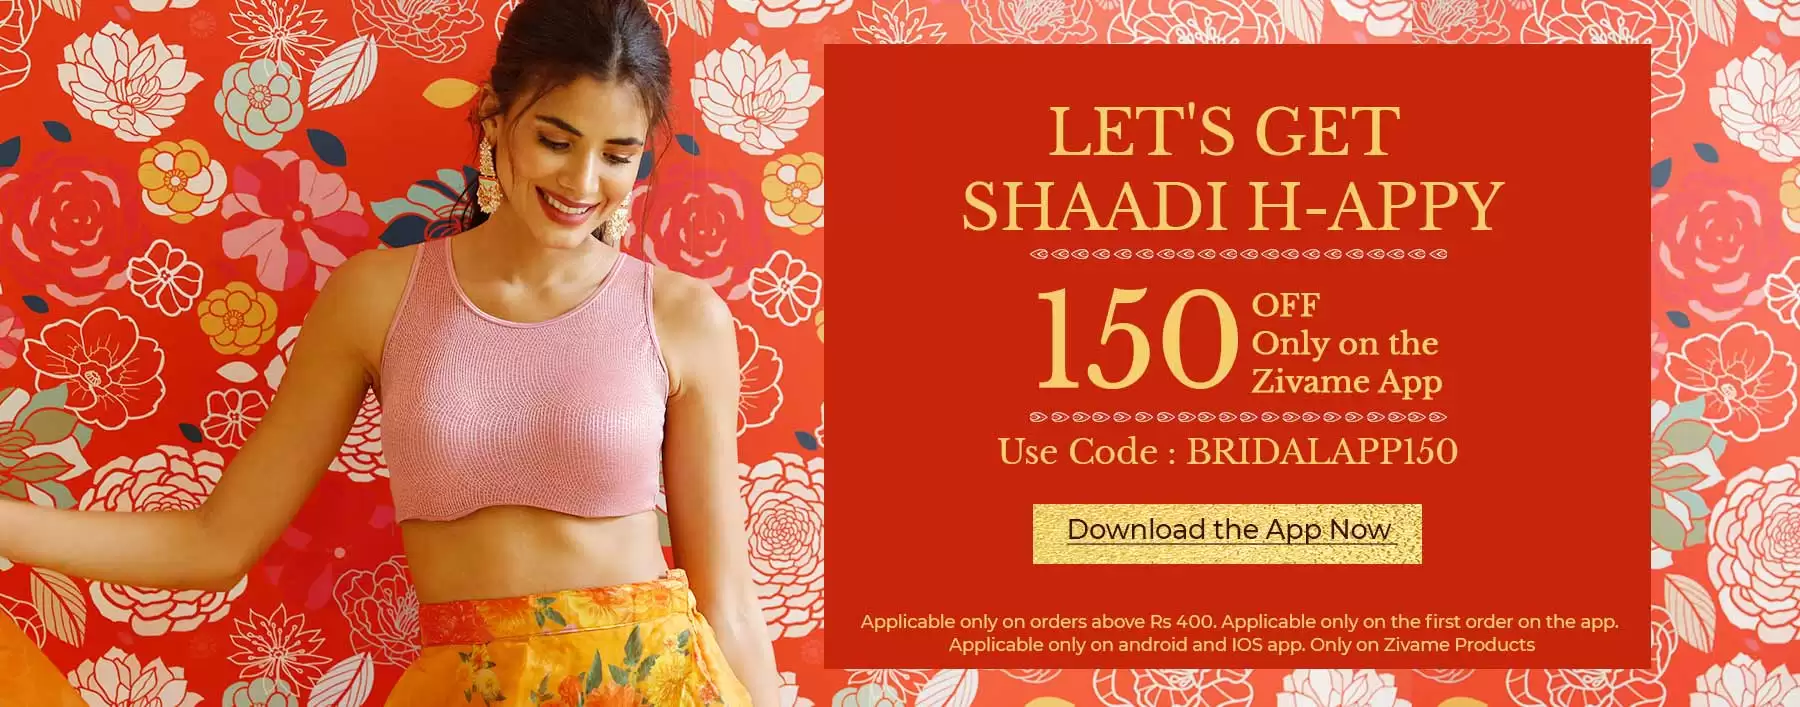 Get Rs. 150 Off On Bridal Range Items With This Discount Coupon At Zivame